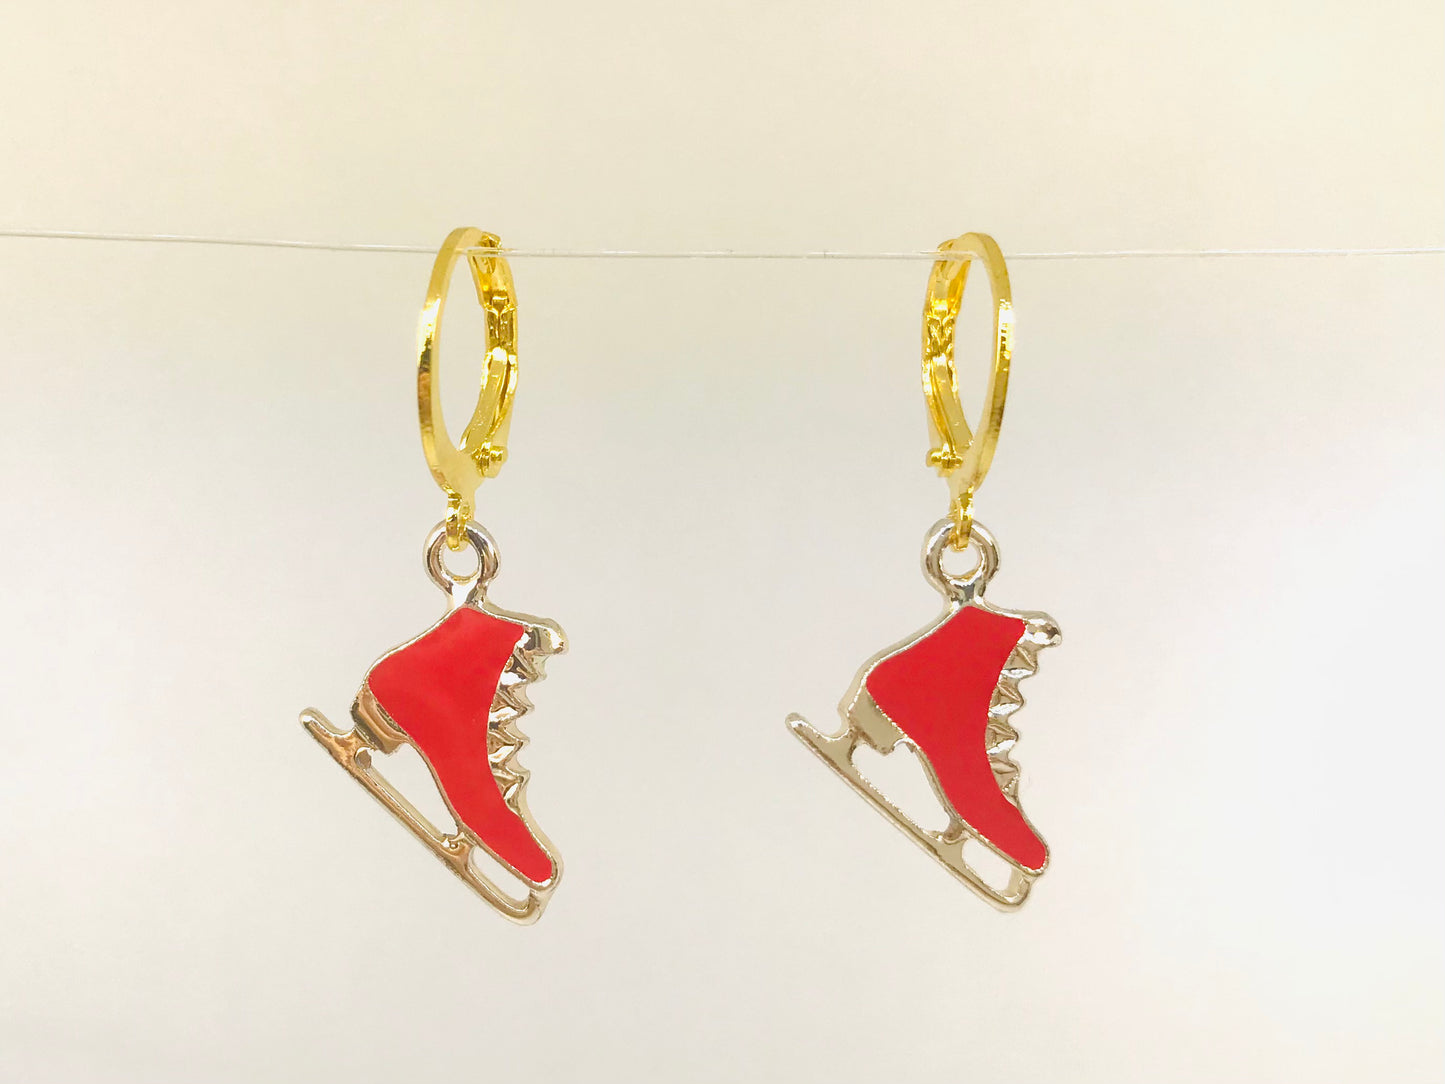 Red Ice Skate Shoes Earrings